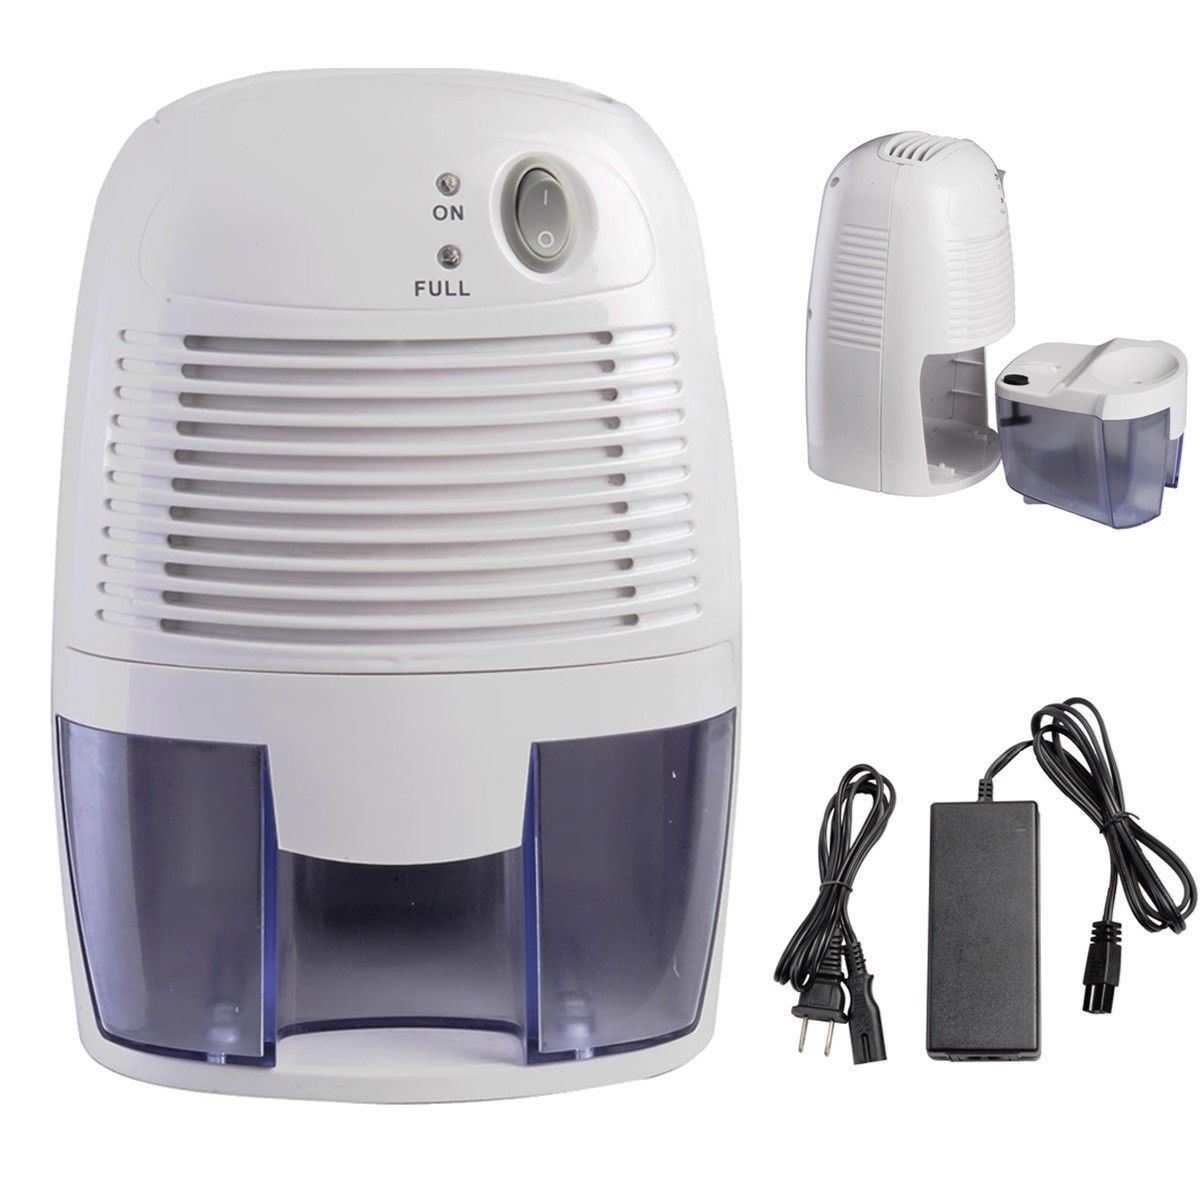 Picture of Online Gym Shop CB16967 Mini Portable Dehumidifier Quiet Electric Drying Moisture Absorber